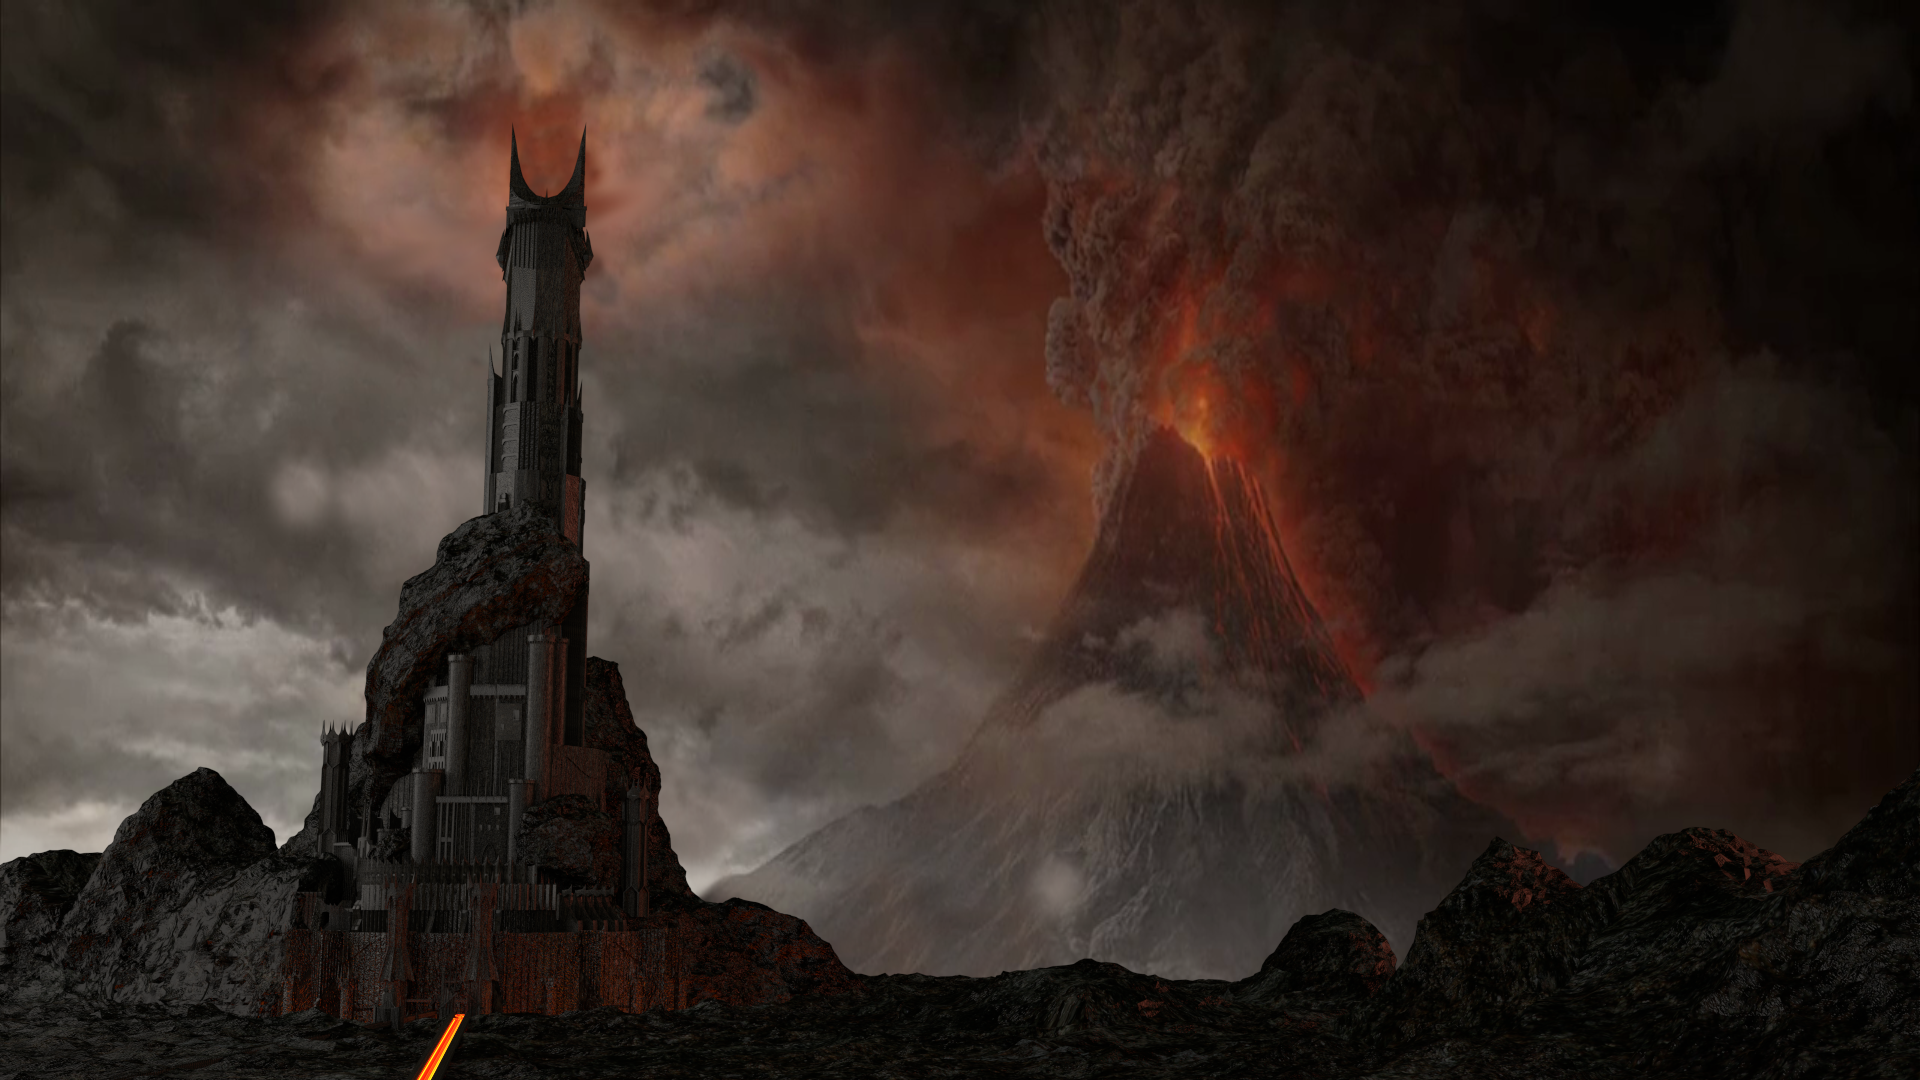 The Dark Tower Of Barad-dur 3d Model - Lord Of The Rings Dark Tower , HD Wallpaper & Backgrounds